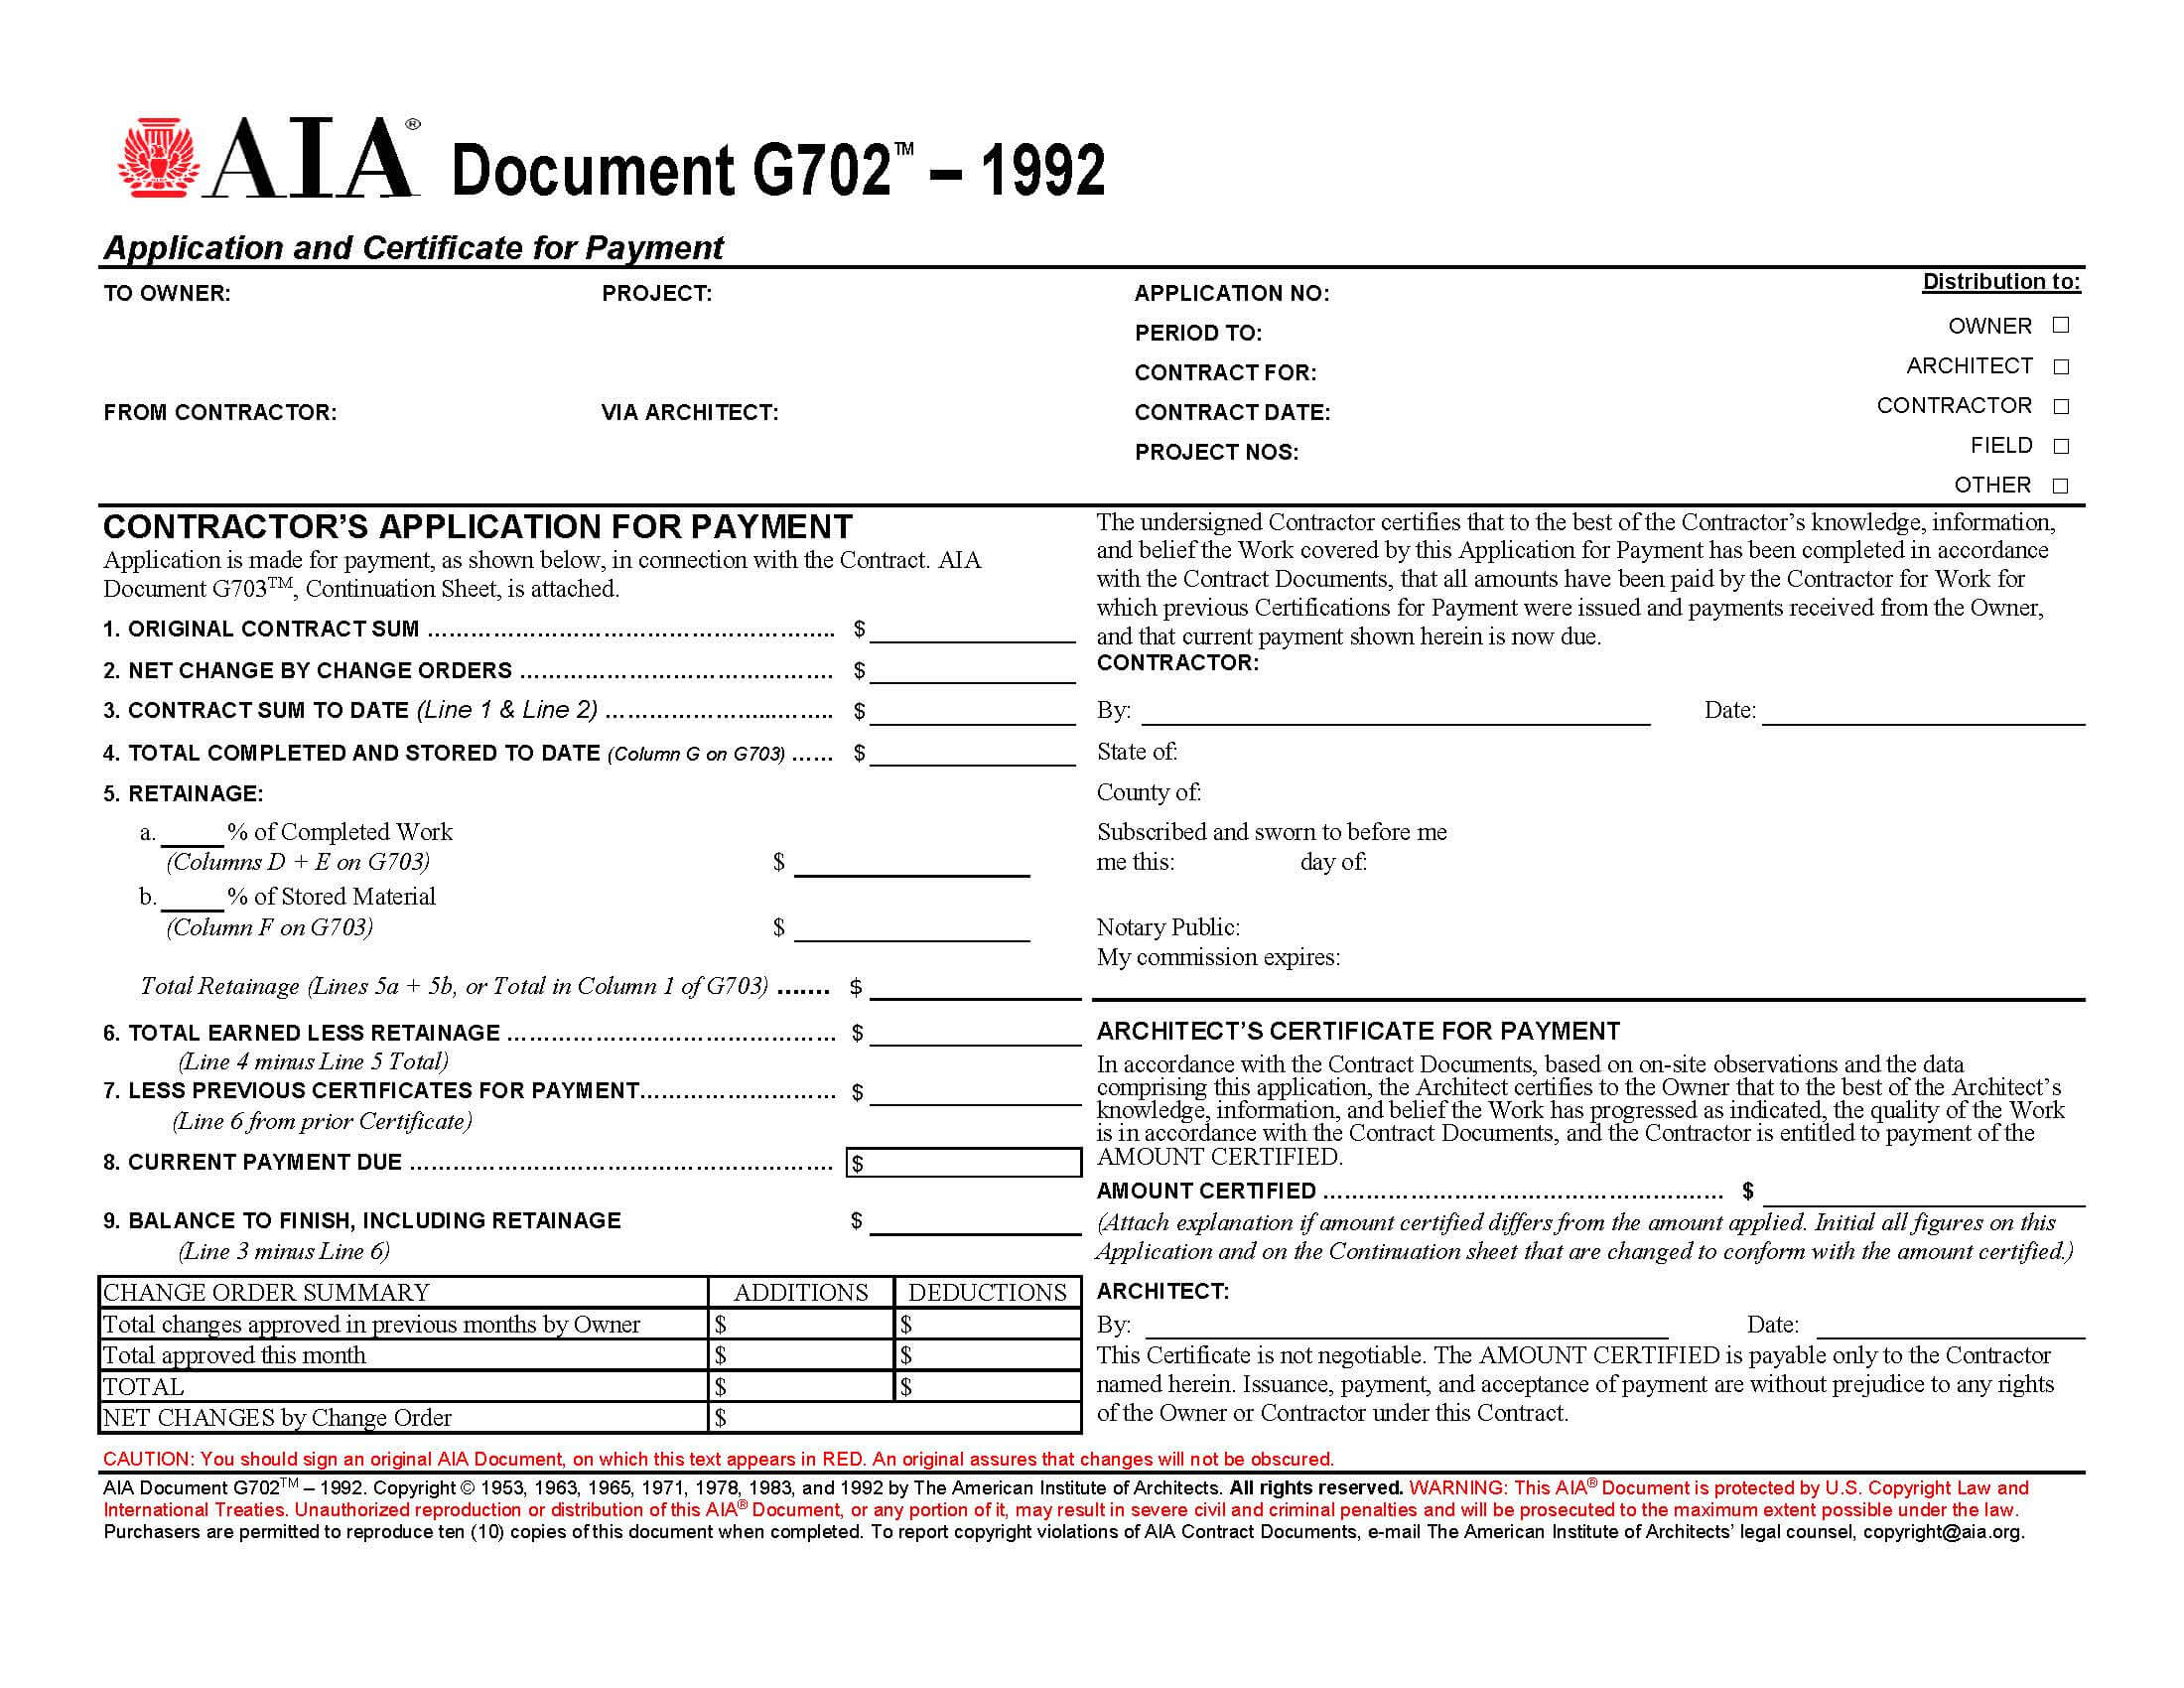 aia-forms-g702-g703-application-certificate-and-continuation-in